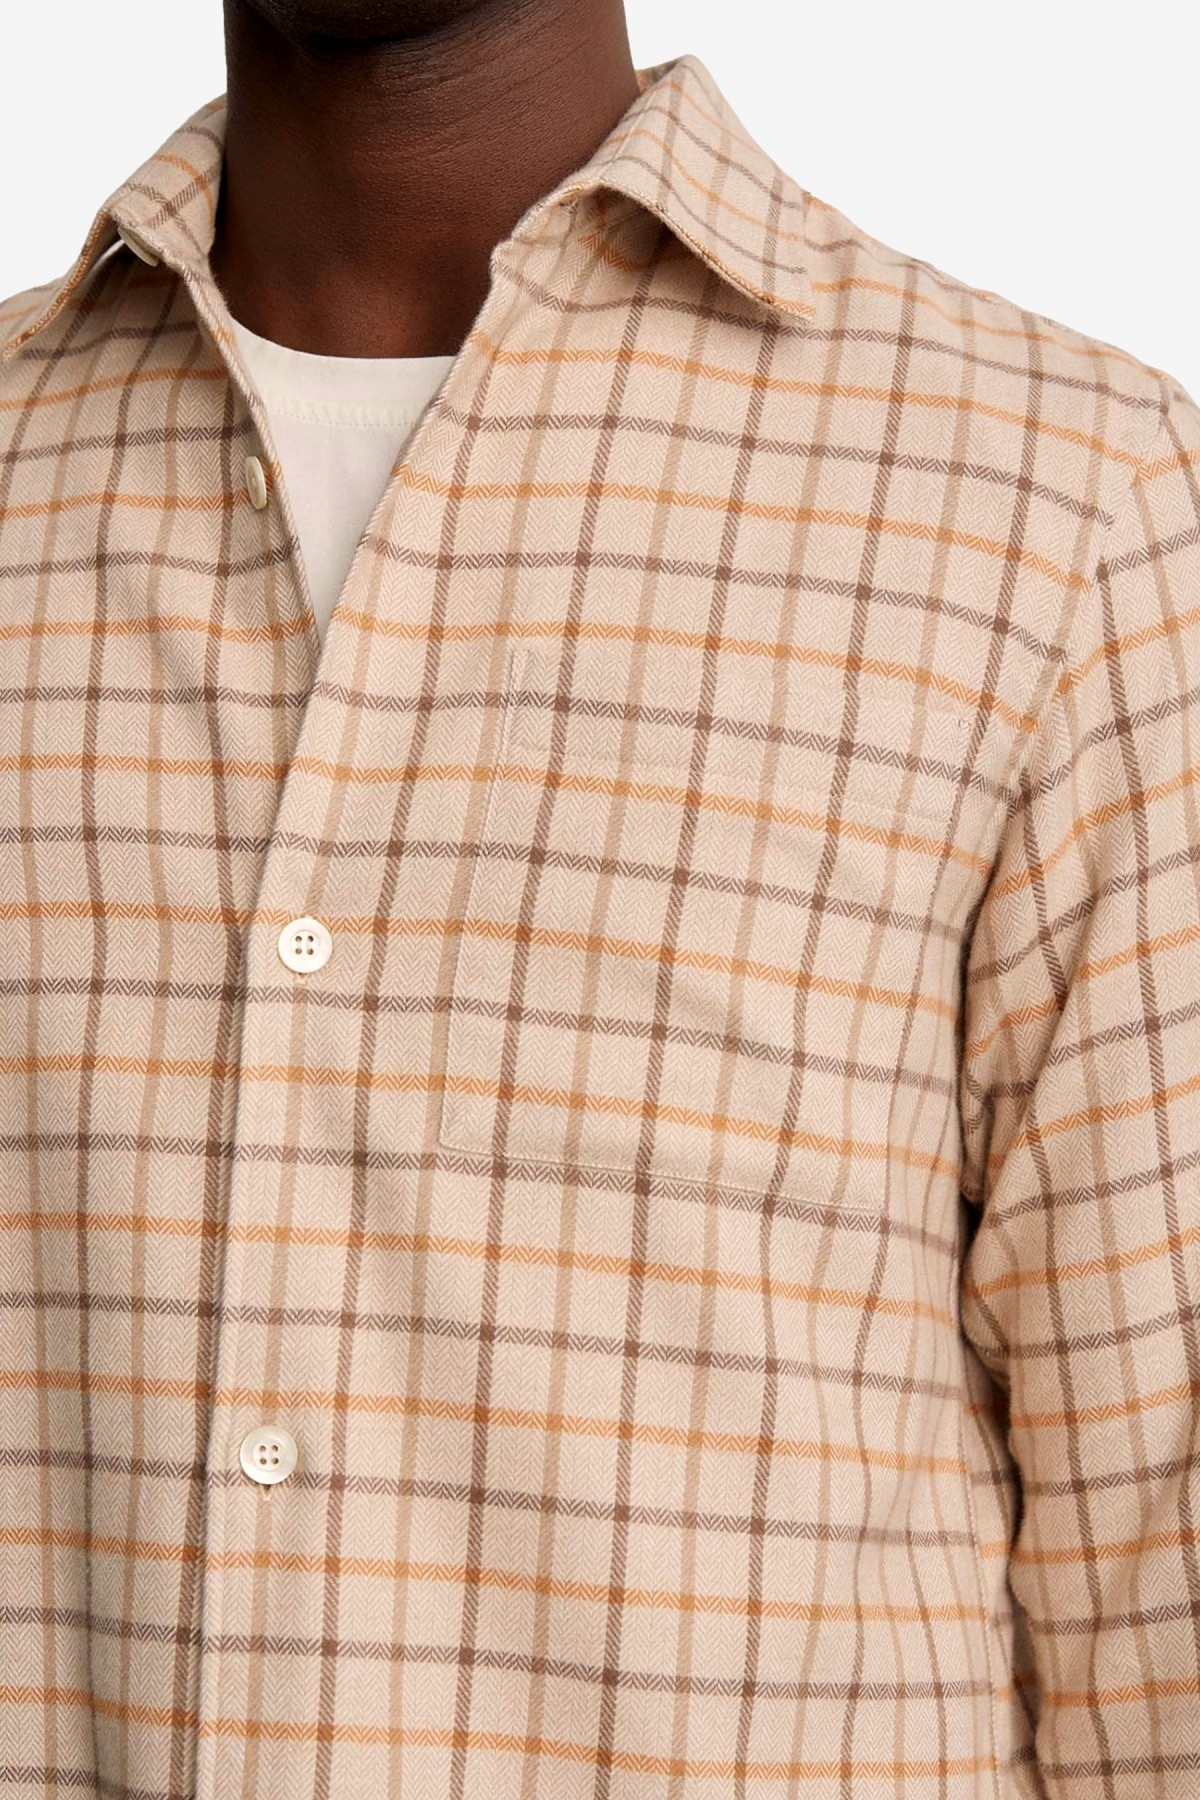 Another Aspect Another Shirt 4.0 in Light Beige Stripe